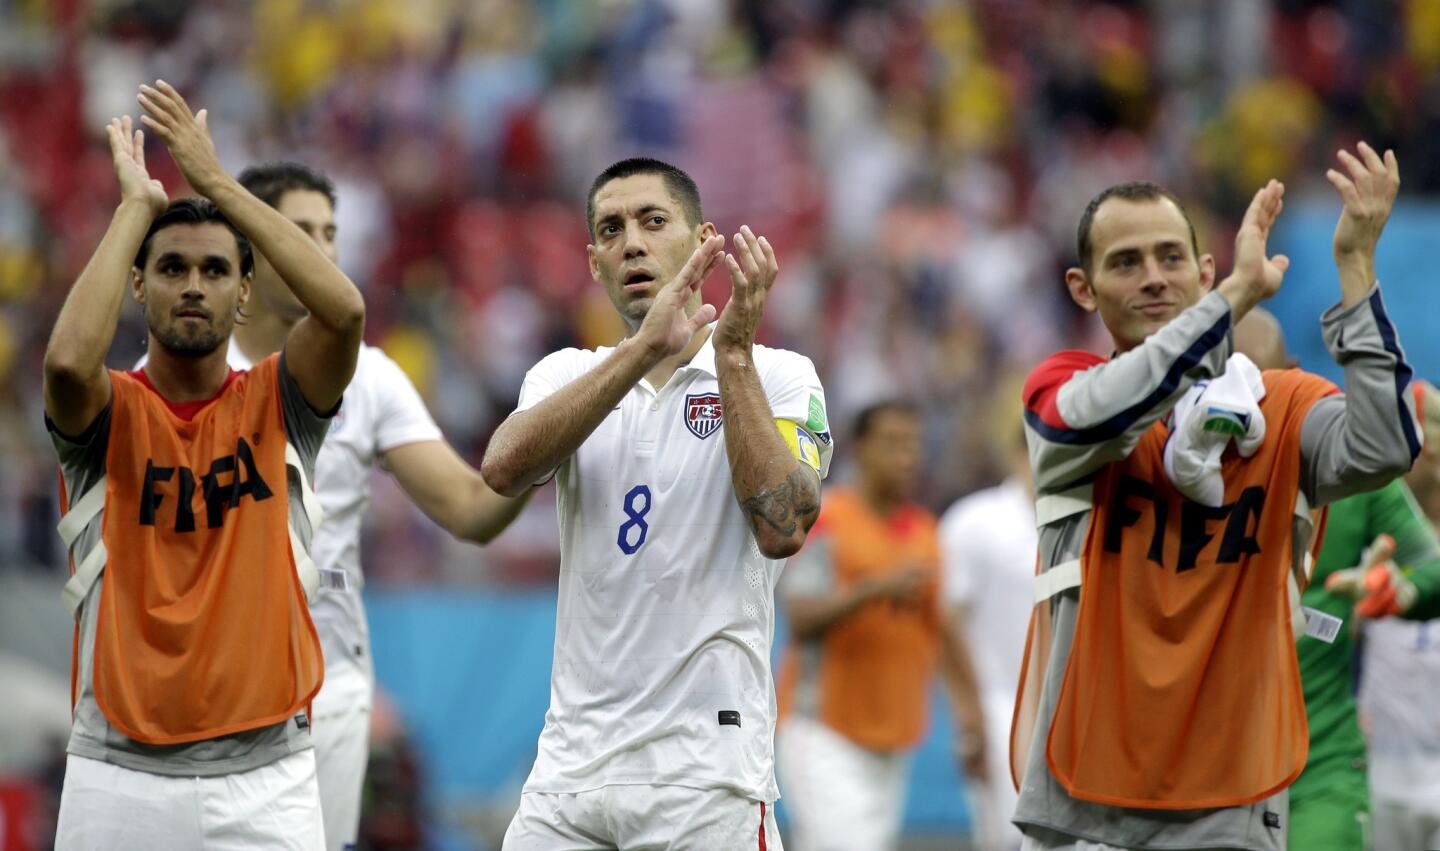 U.S. forward Clint Dempsey, center, celebrates with his teammates after advancing to the Round of 16 at the World Cup. The U.S. advanced despite the team's 1-0 loss to Germany in their final match of Group G play.